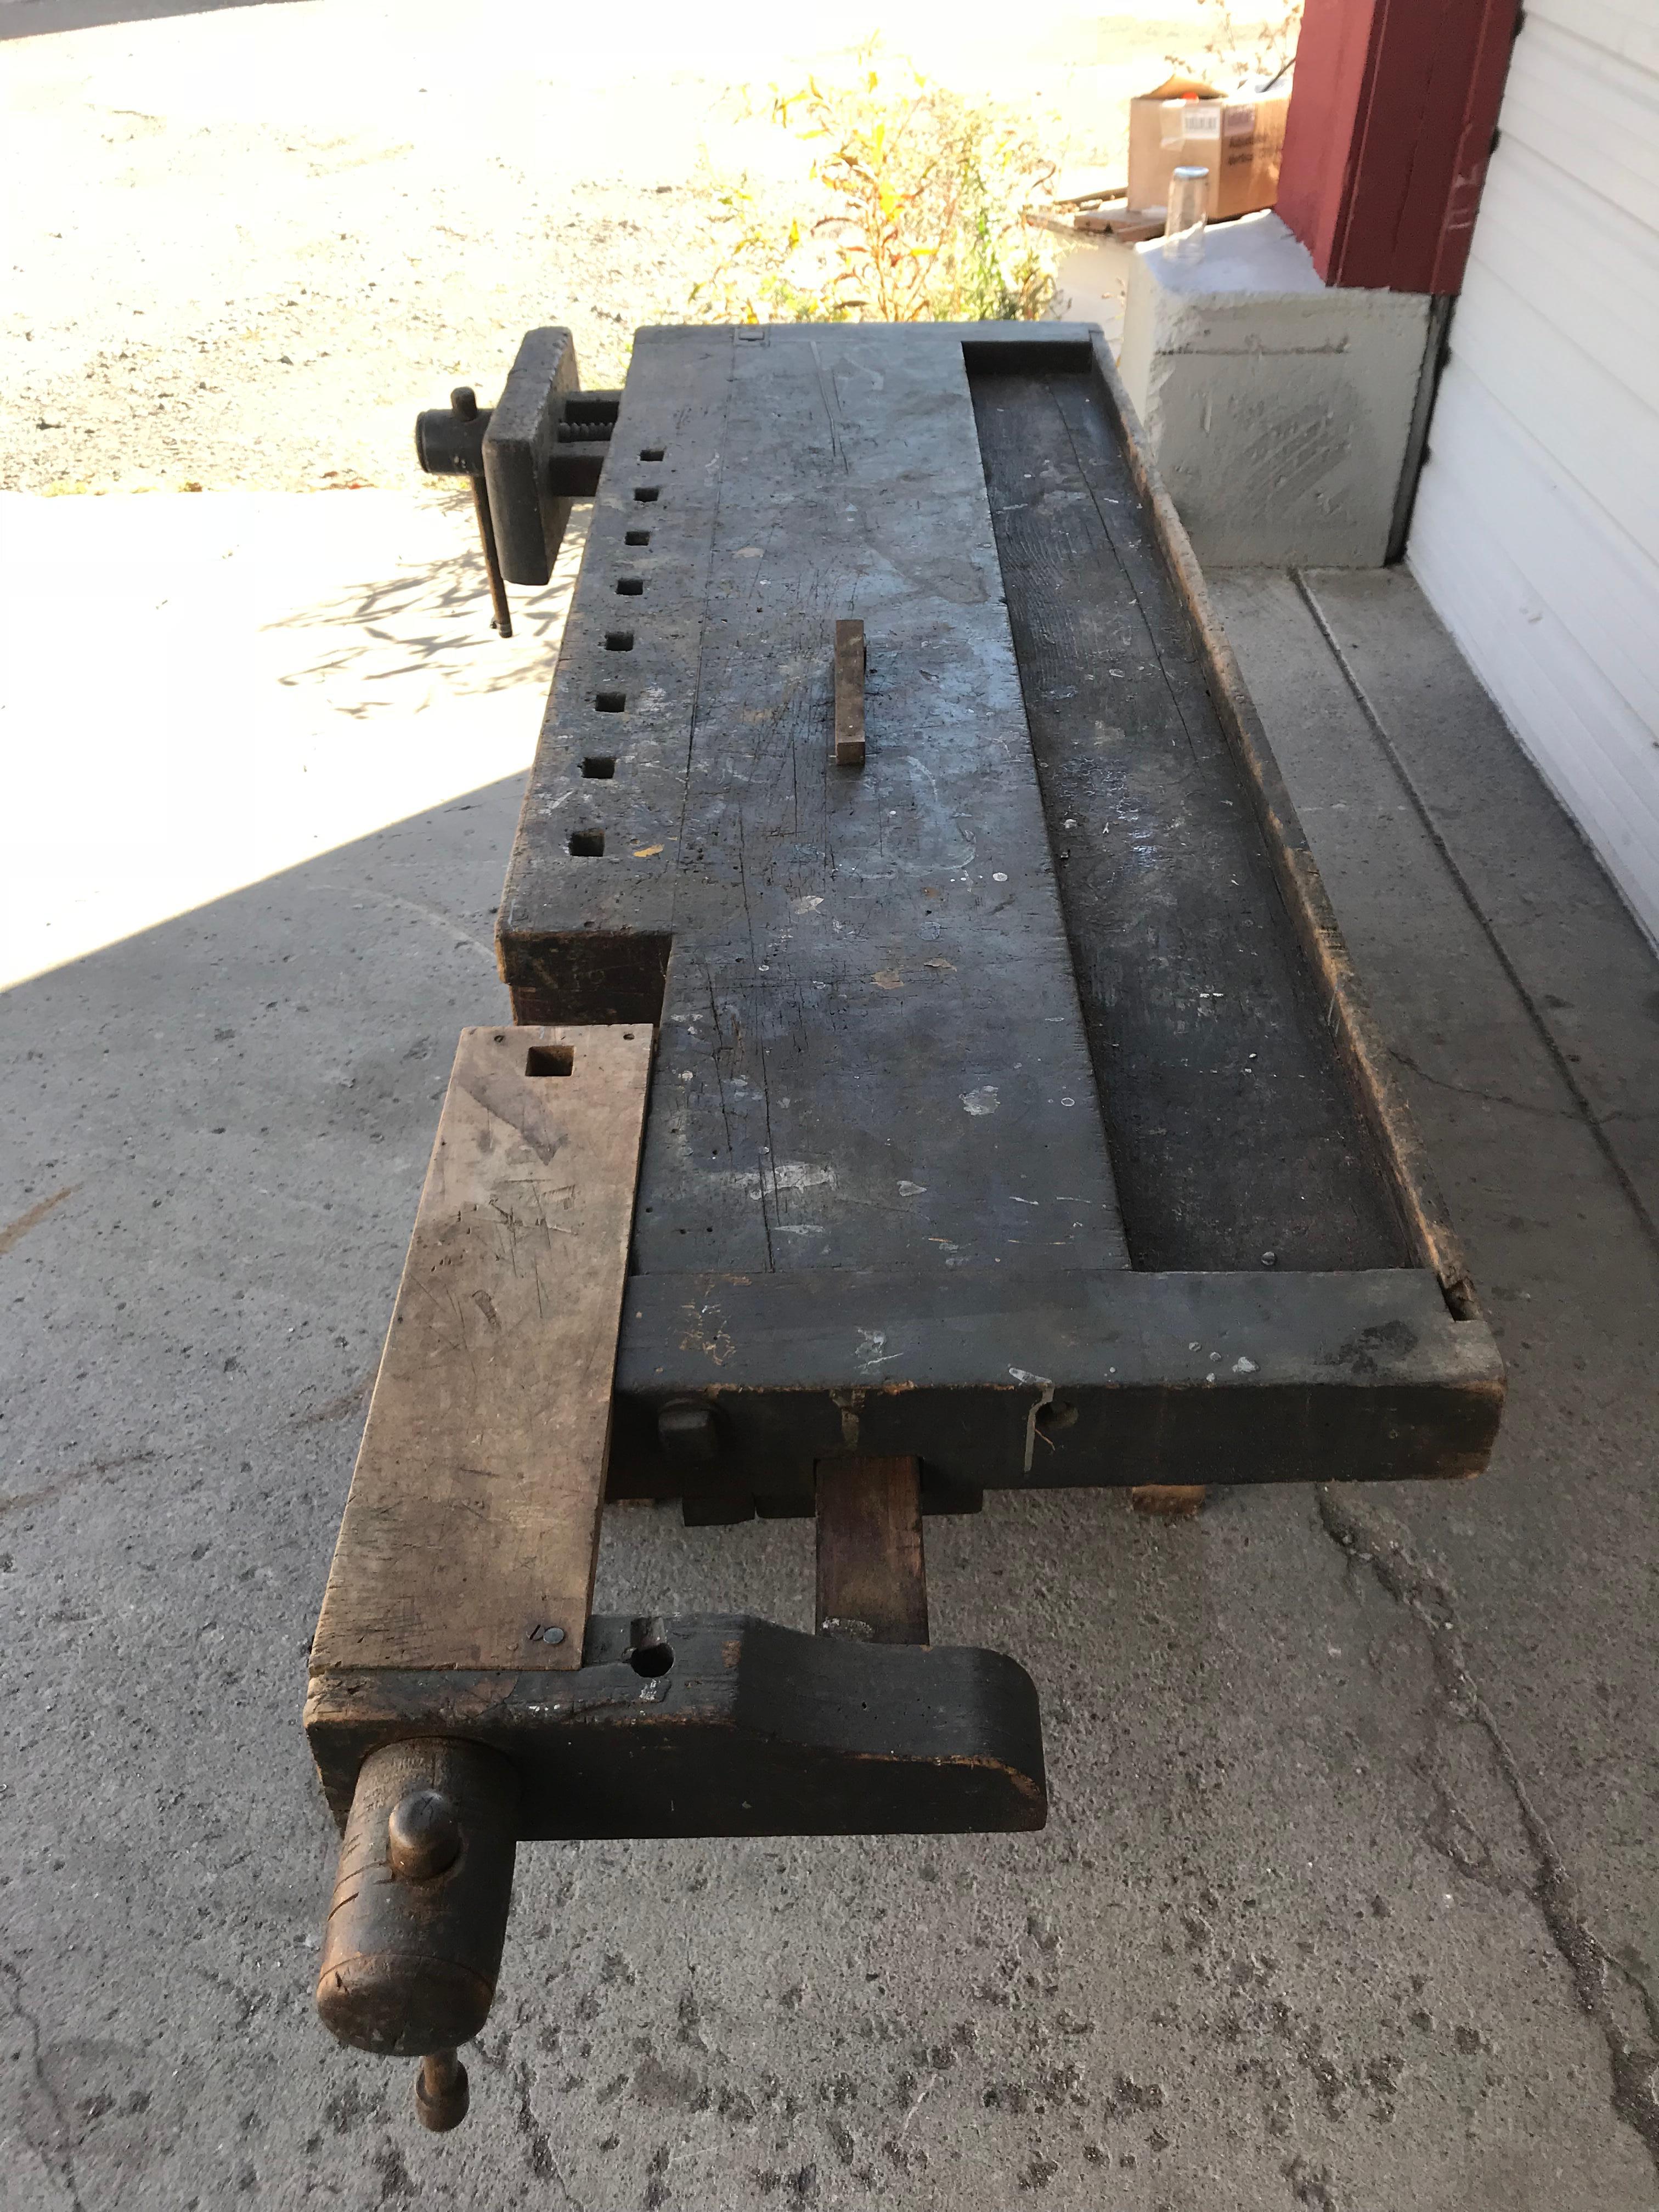 Antique industrial carpenters workbench, 2 vises, 2 drawers. Amazing patina, an interesting and well used craftsman's work bench from early 20th century, Hand delivery avail to New York City or anywhere en route from Buffalo NY.